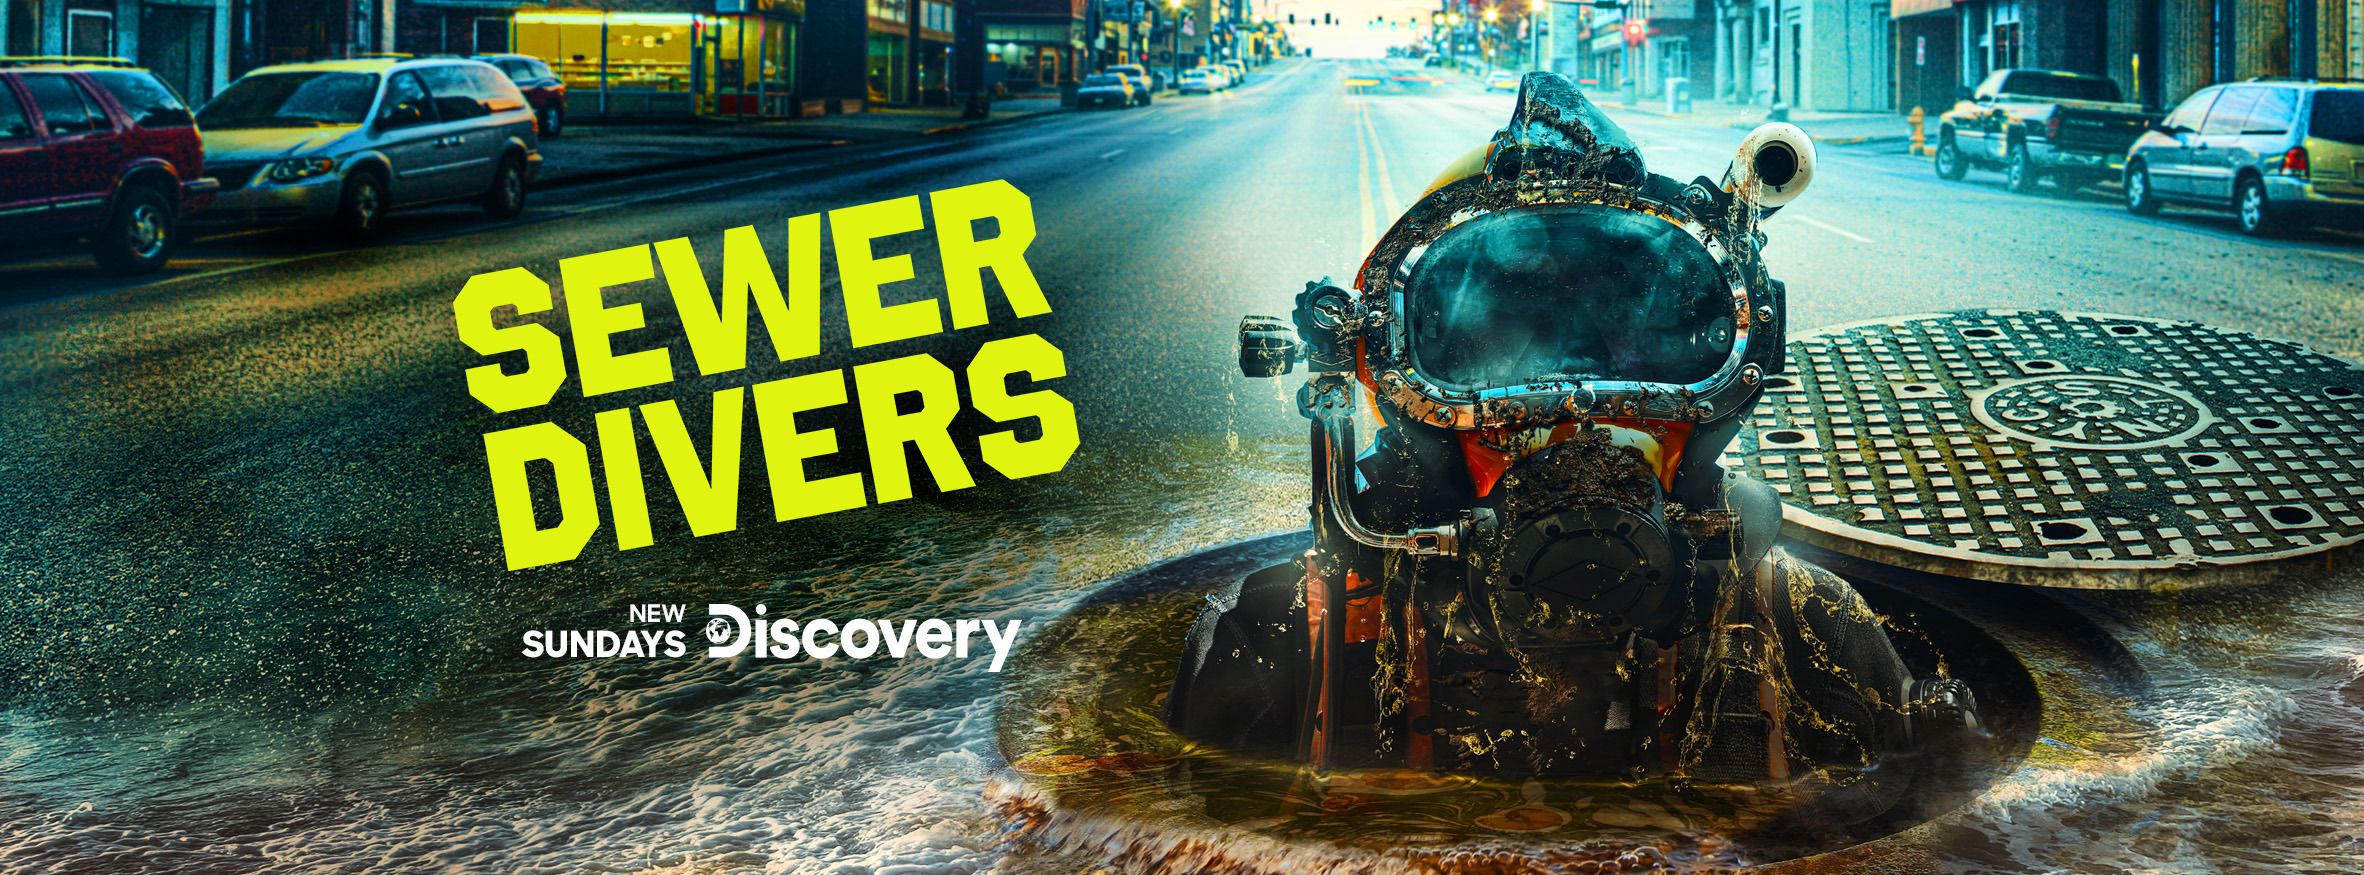 Mega Sized TV Poster Image for Sewer Divers (#2 of 2)